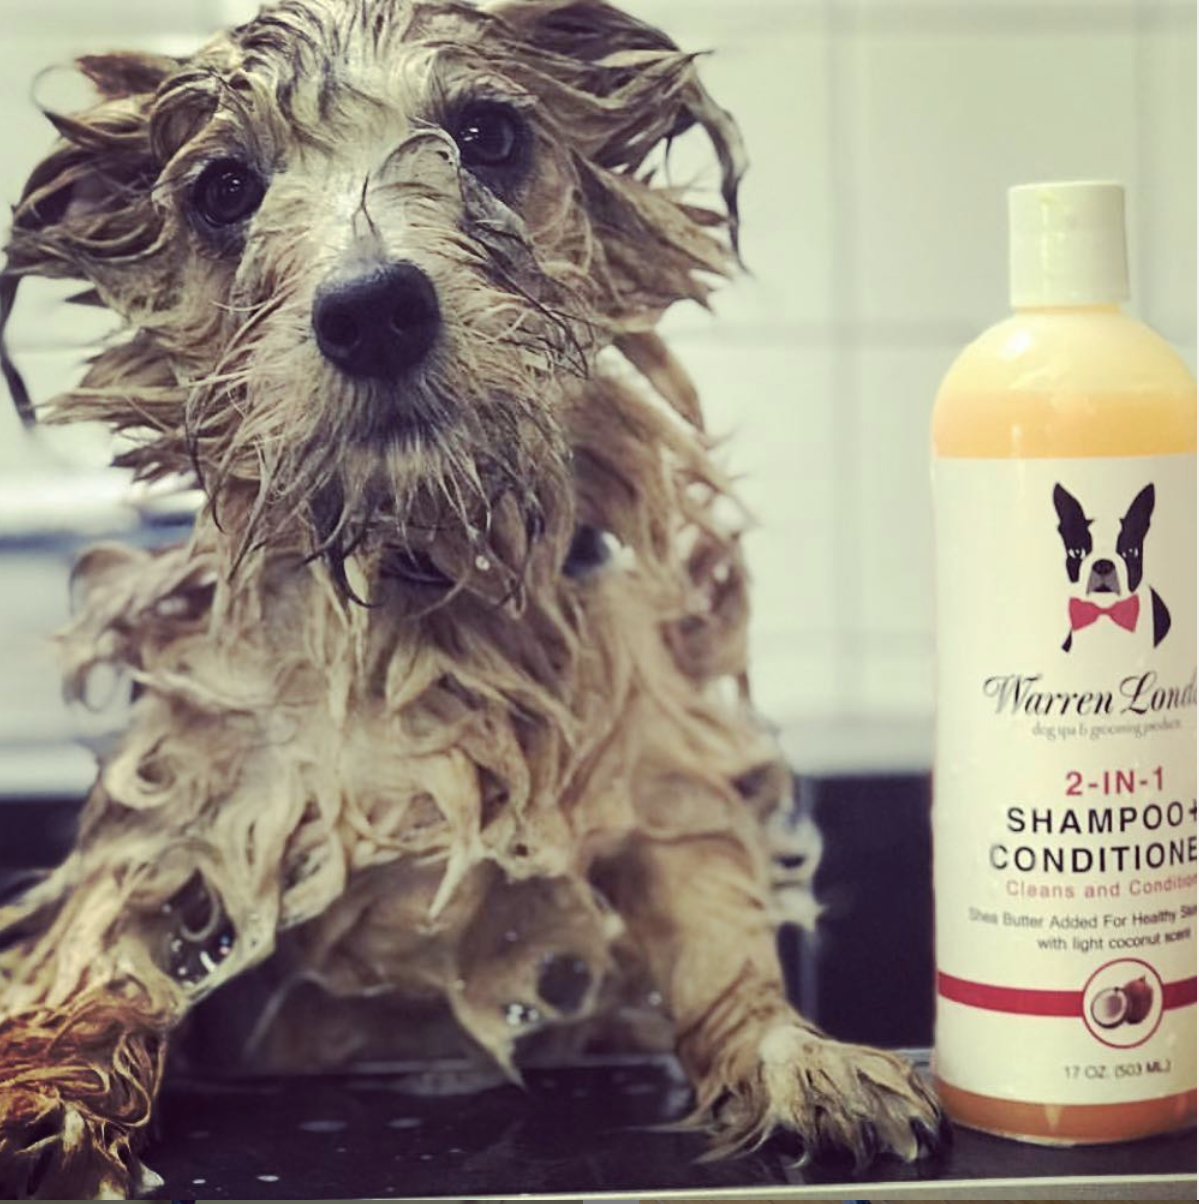 Warren London Dog Products - Shampoo: 2in1 plus Conditioner - 2 Sizes